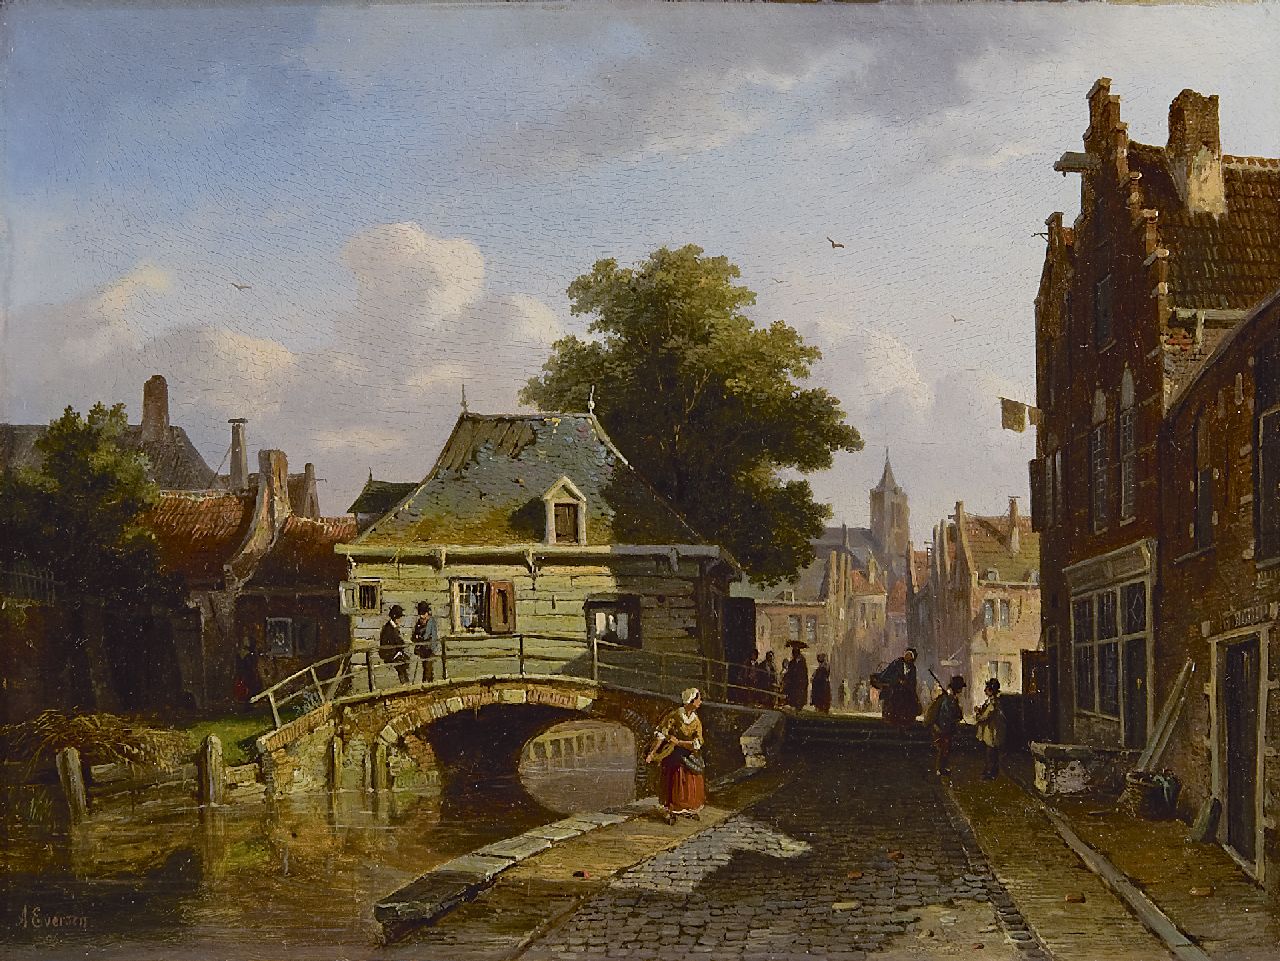 Eversen A.  | Adrianus Eversen, A view of a Dutch town, oil on panel 25.2 x 33.5 cm, signed l.l. and dated '56